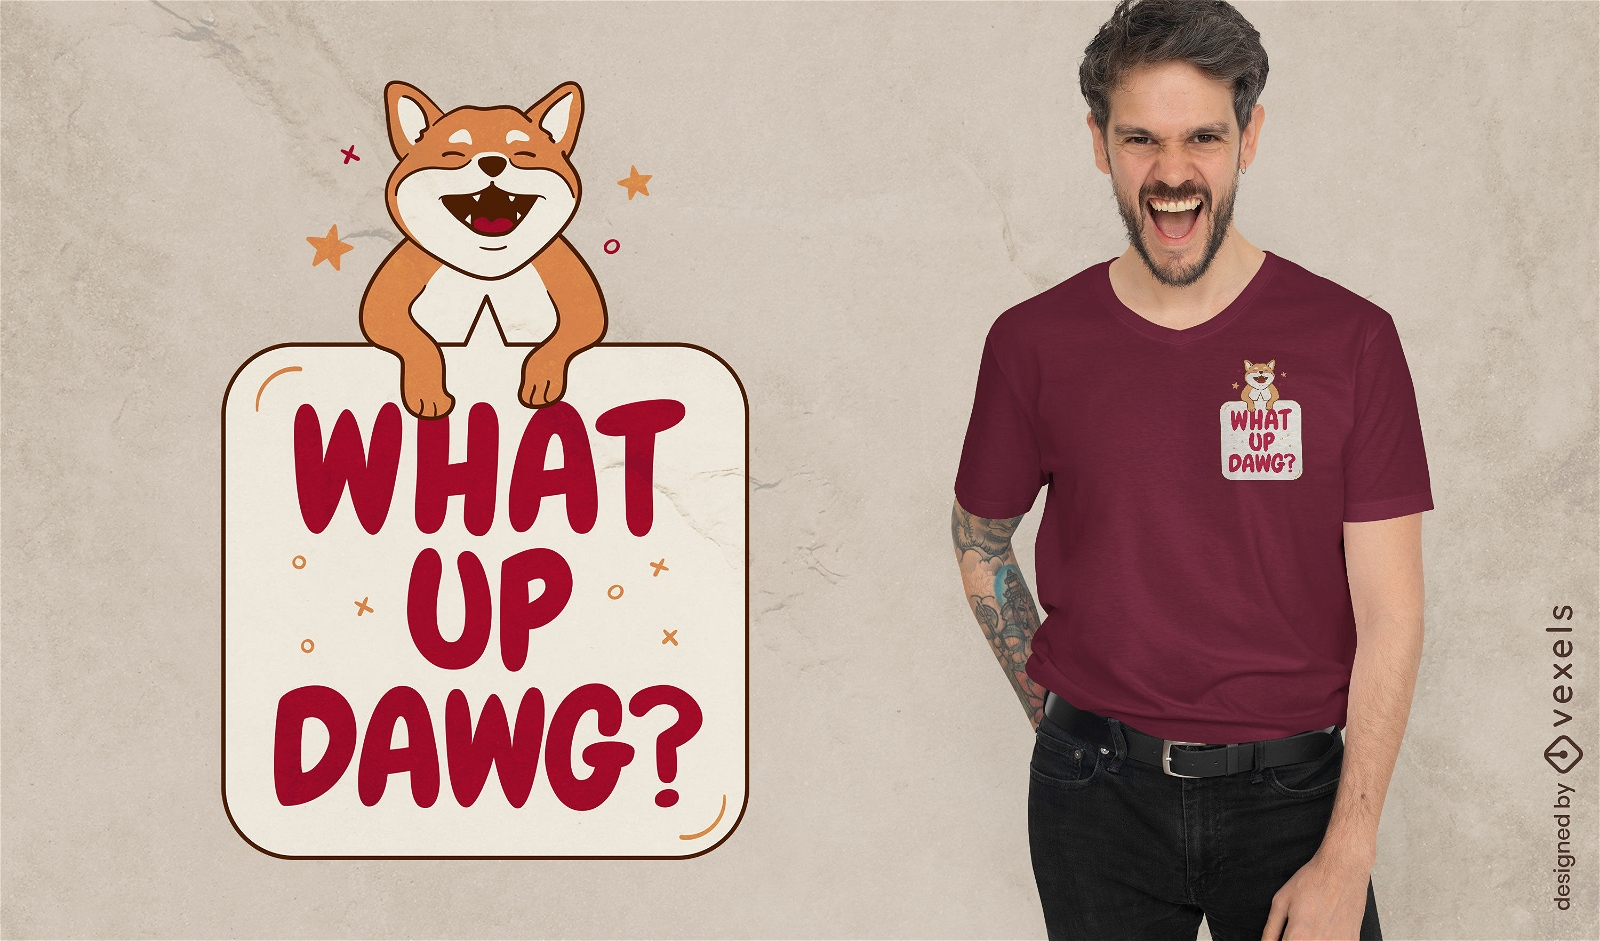 Dawg pet quote t-shirt design